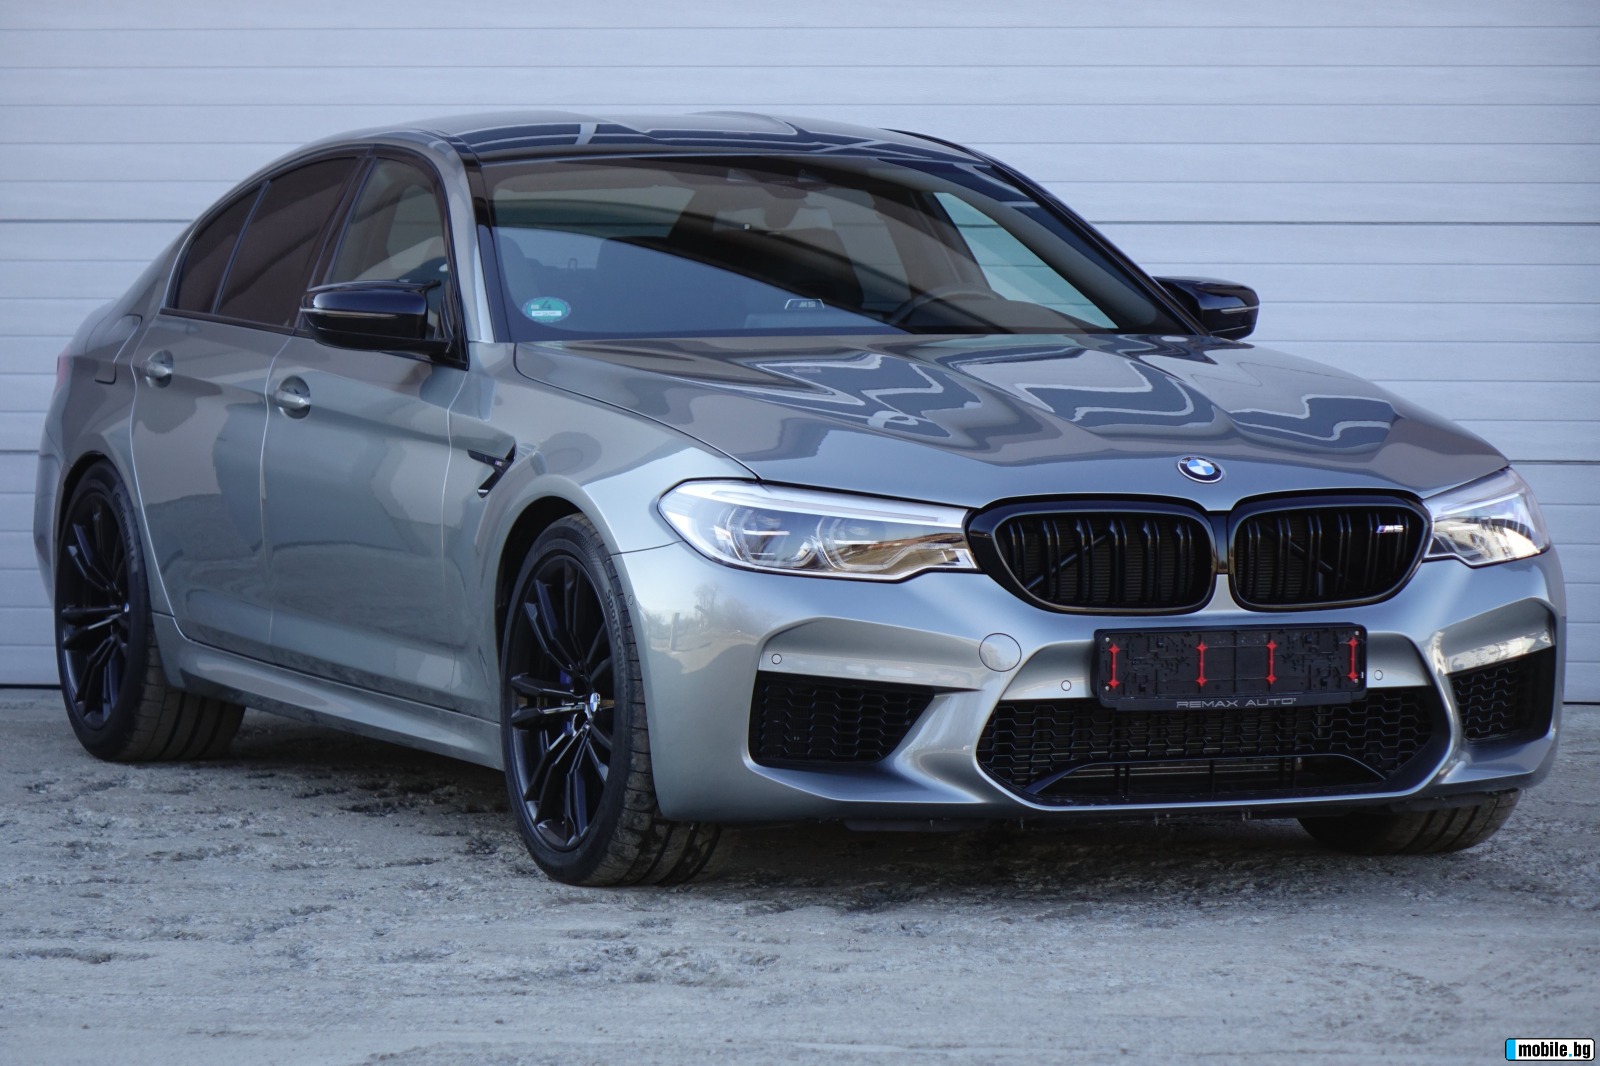 BMW M5 XDRIVE*COMPETITION*CARBON*LED* | Mobile.bg   1